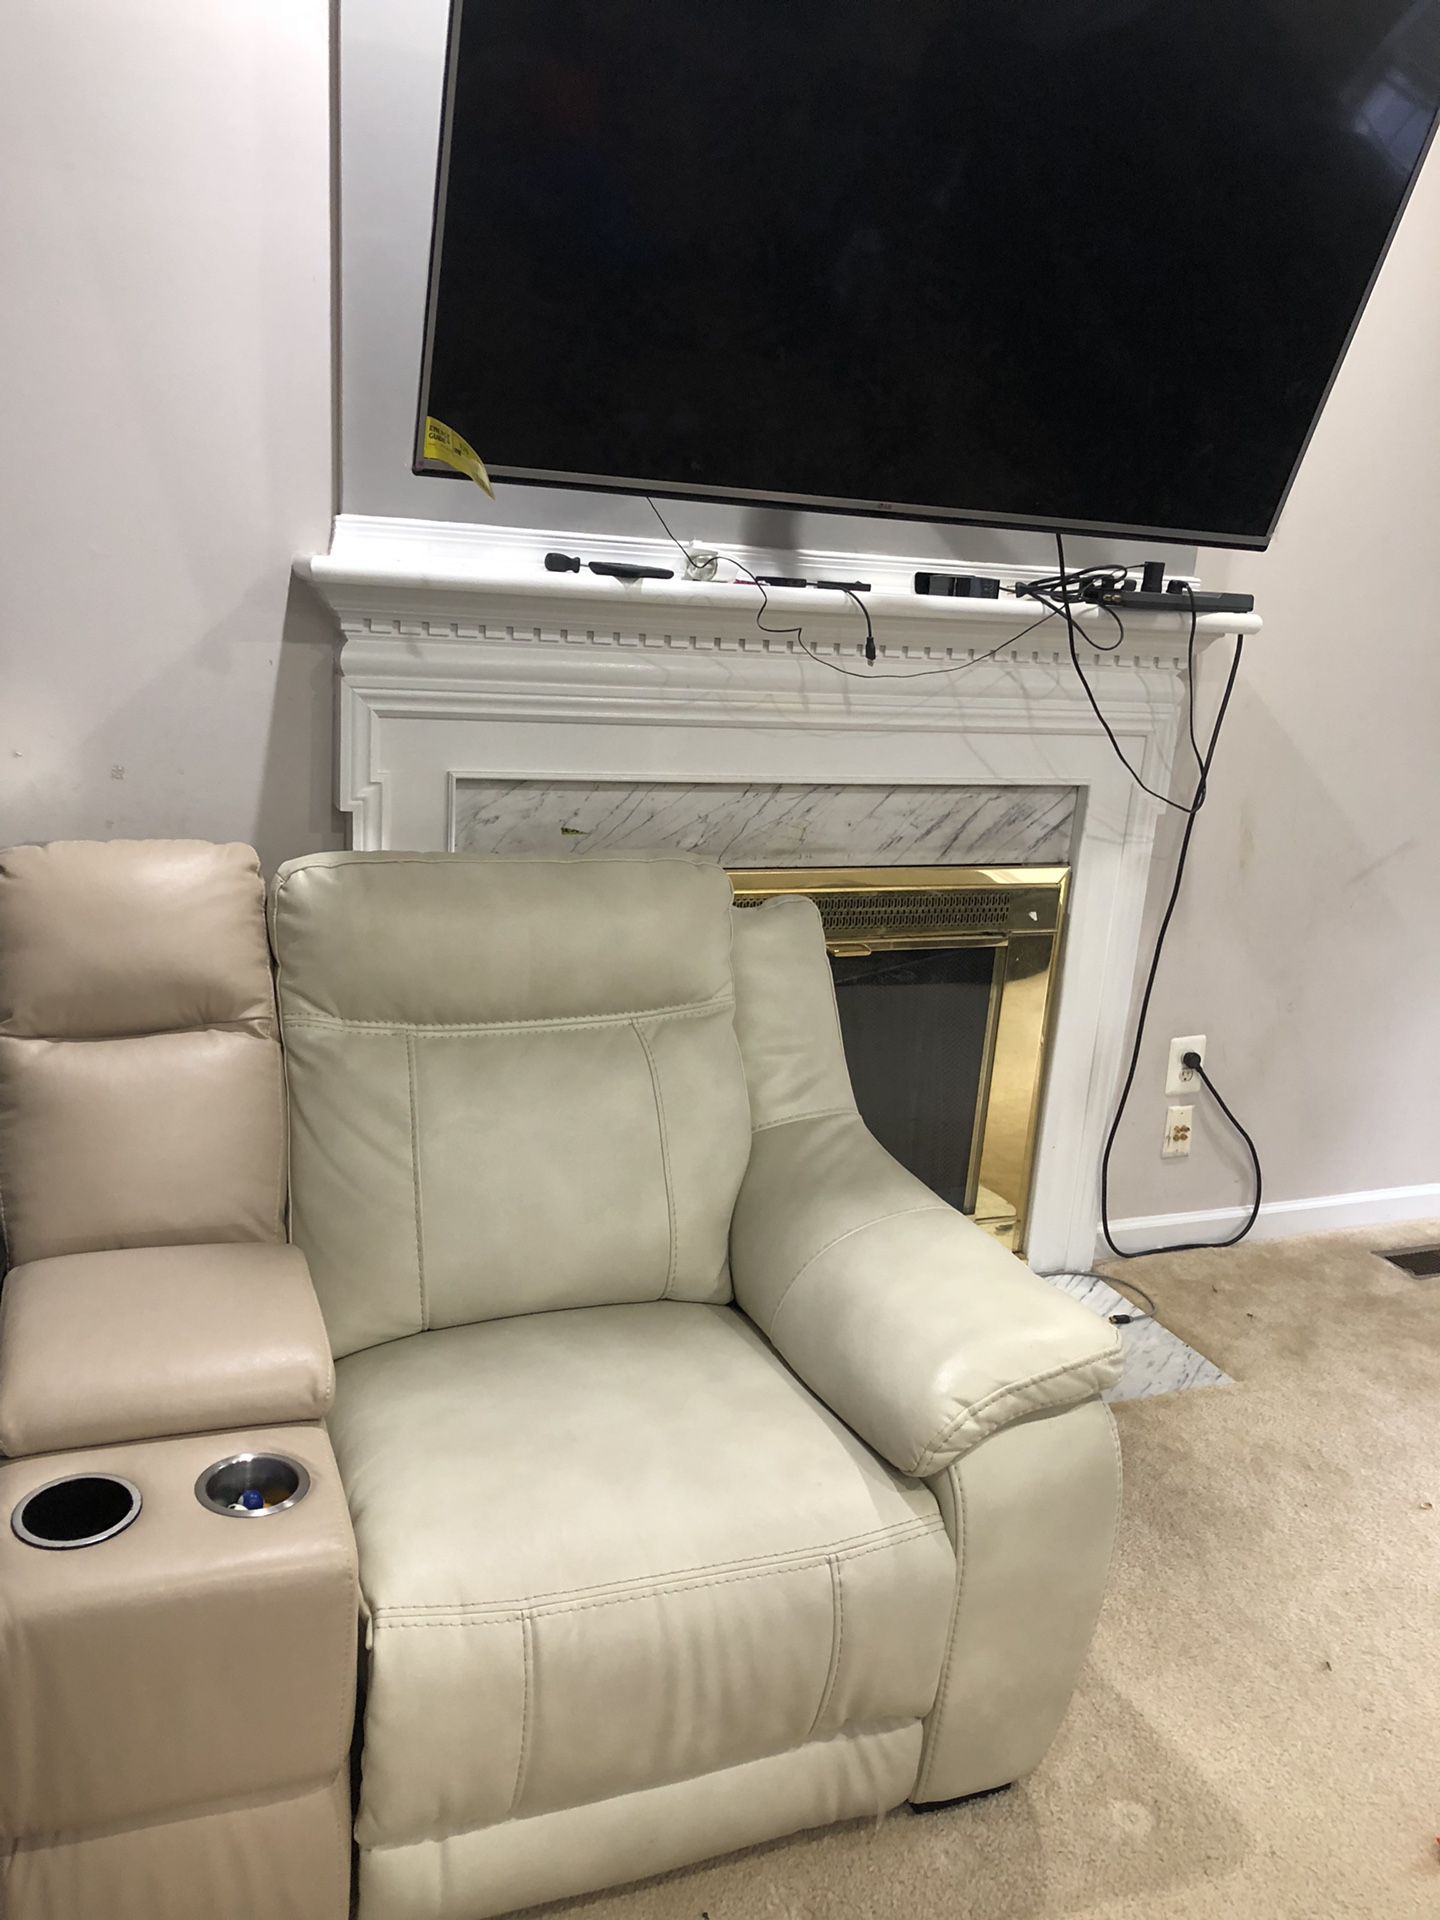 Barely used recliner priced to sell